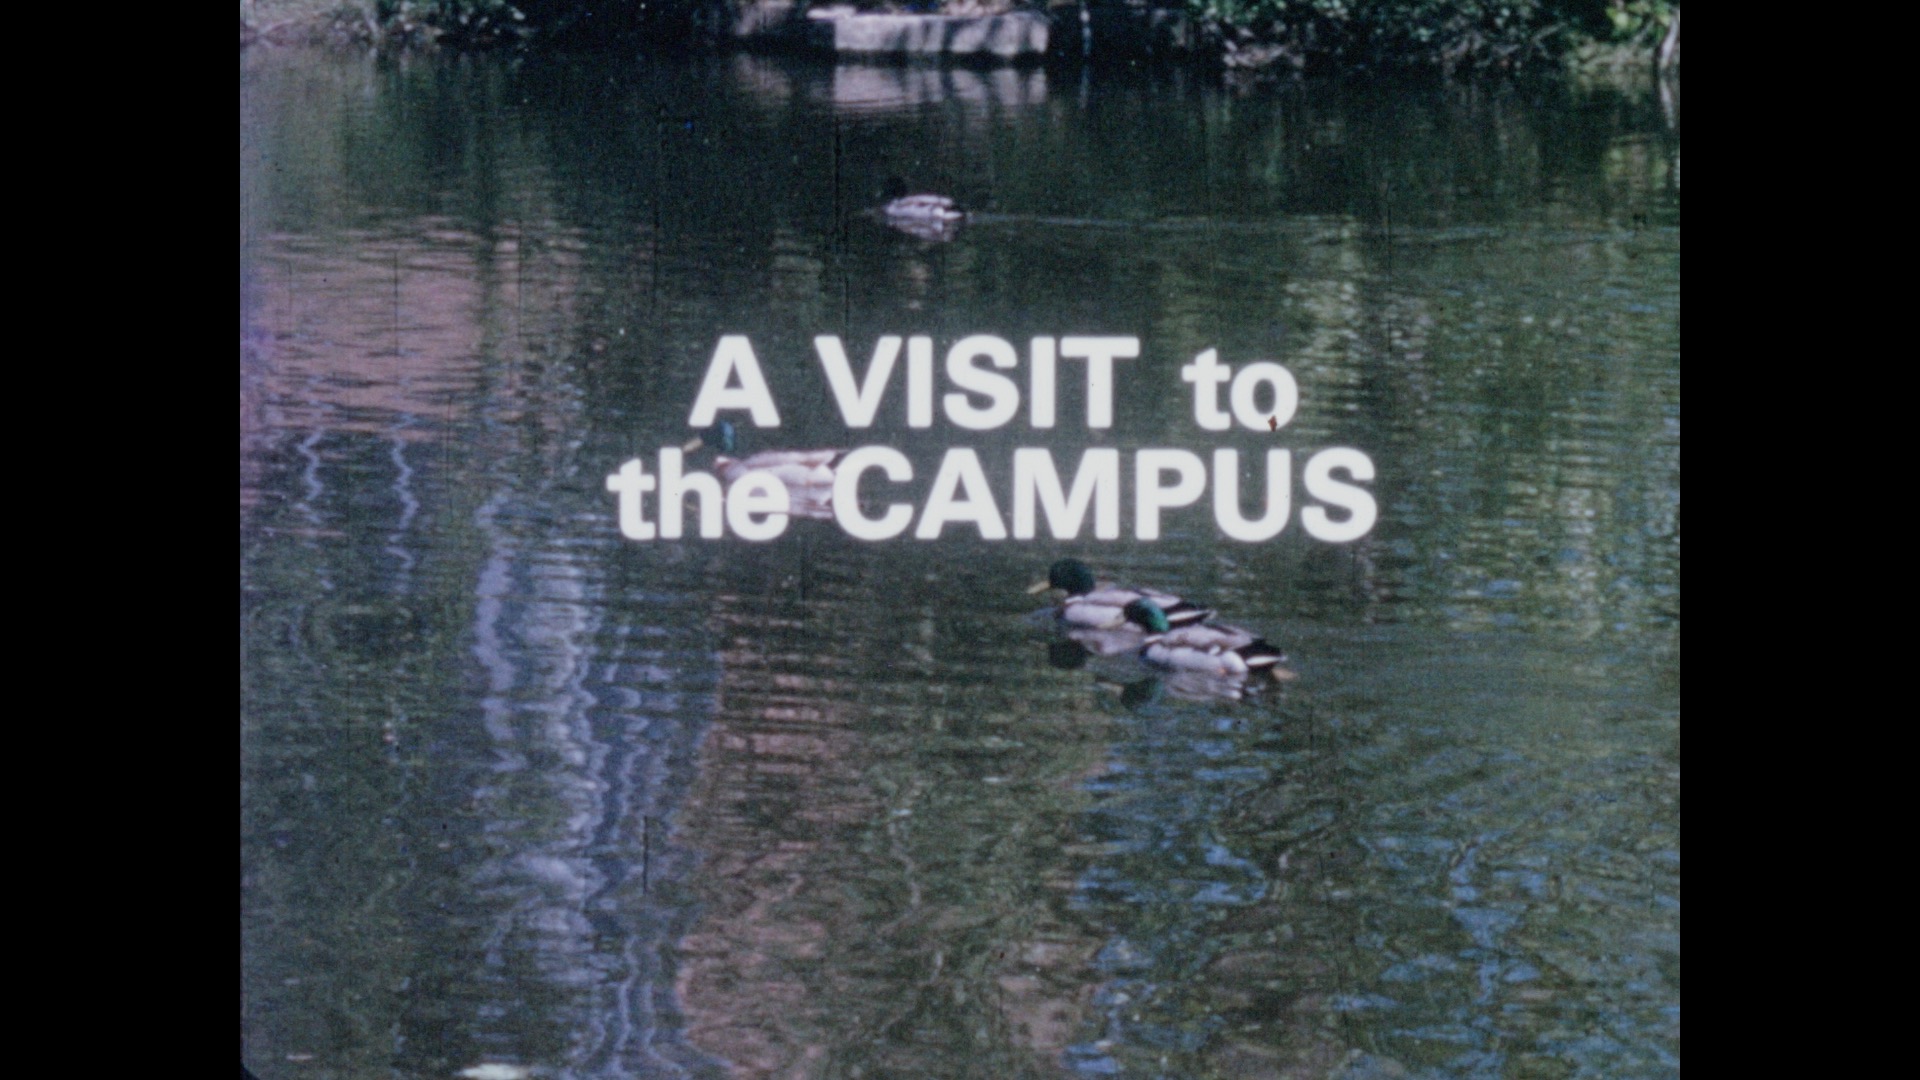 A Visit to the Campus, 1968